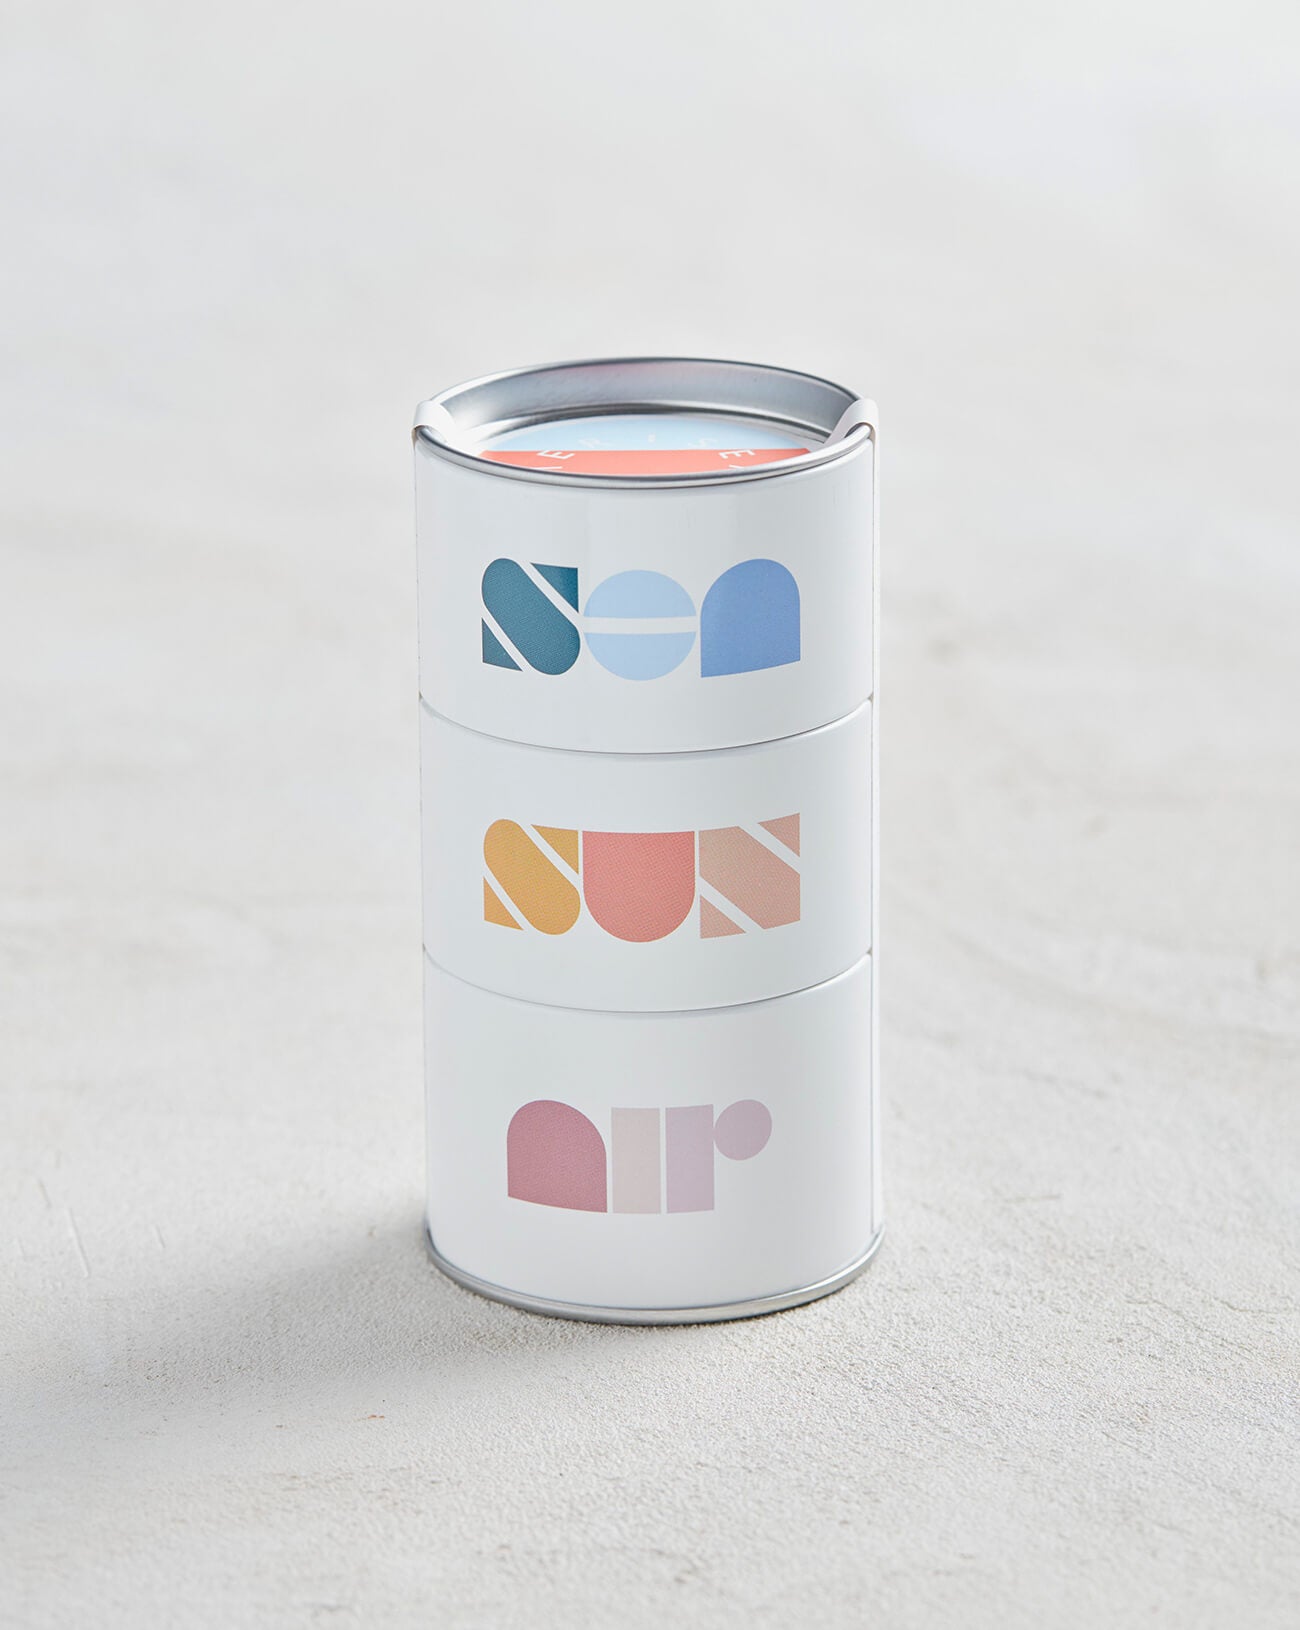 stack of three candles with sea sun and air written on them sitting on a white background